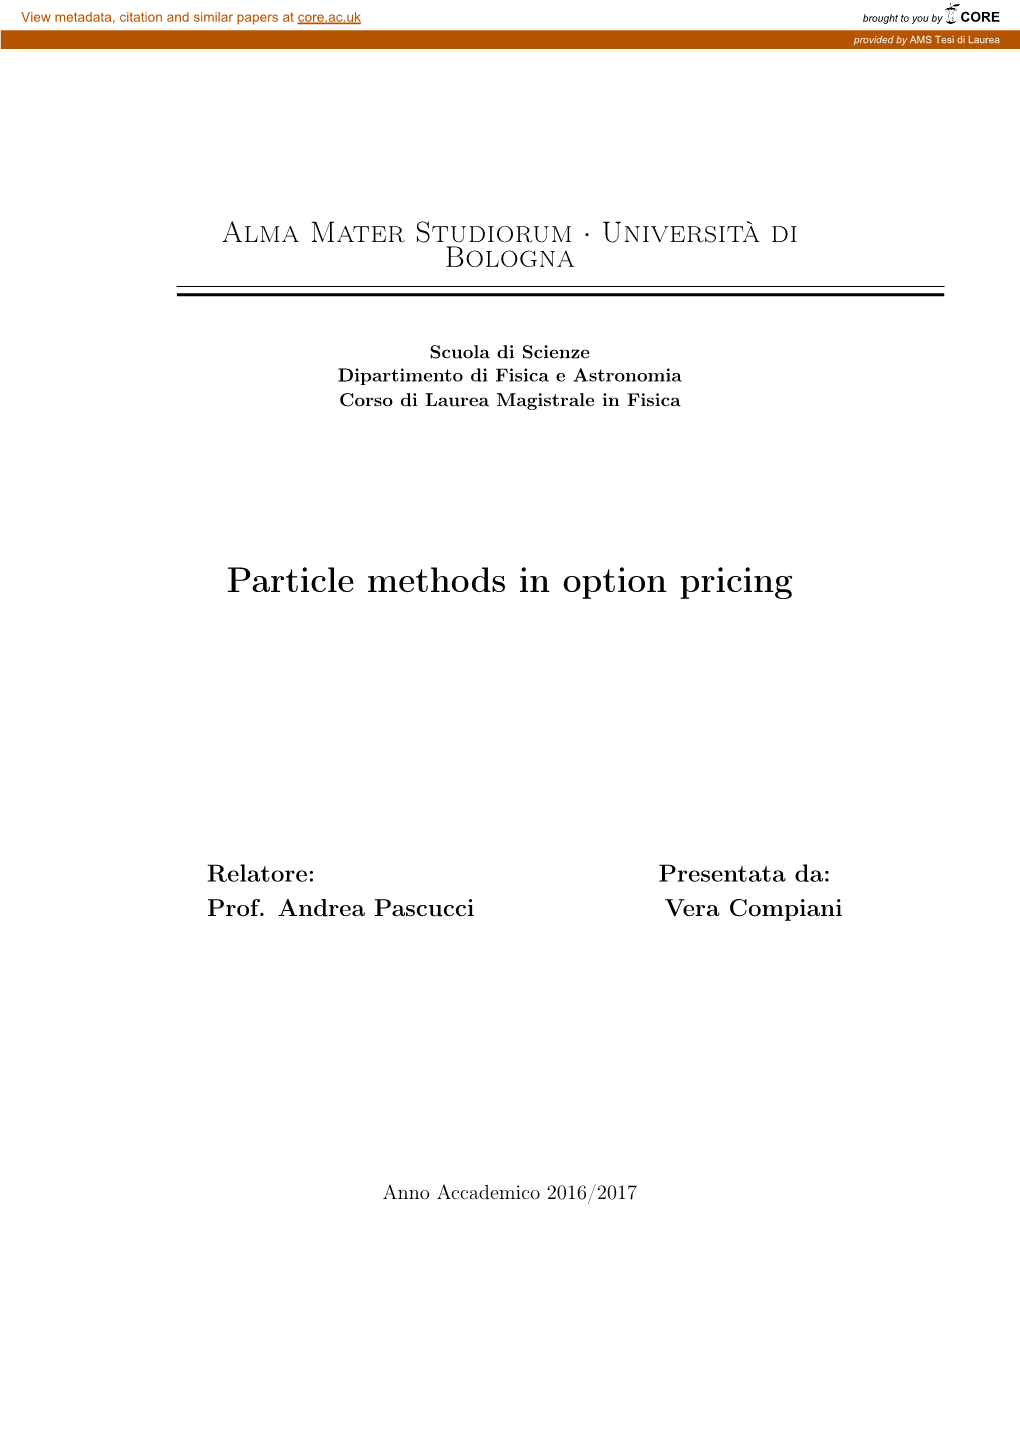 Particle Methods in Option Pricing